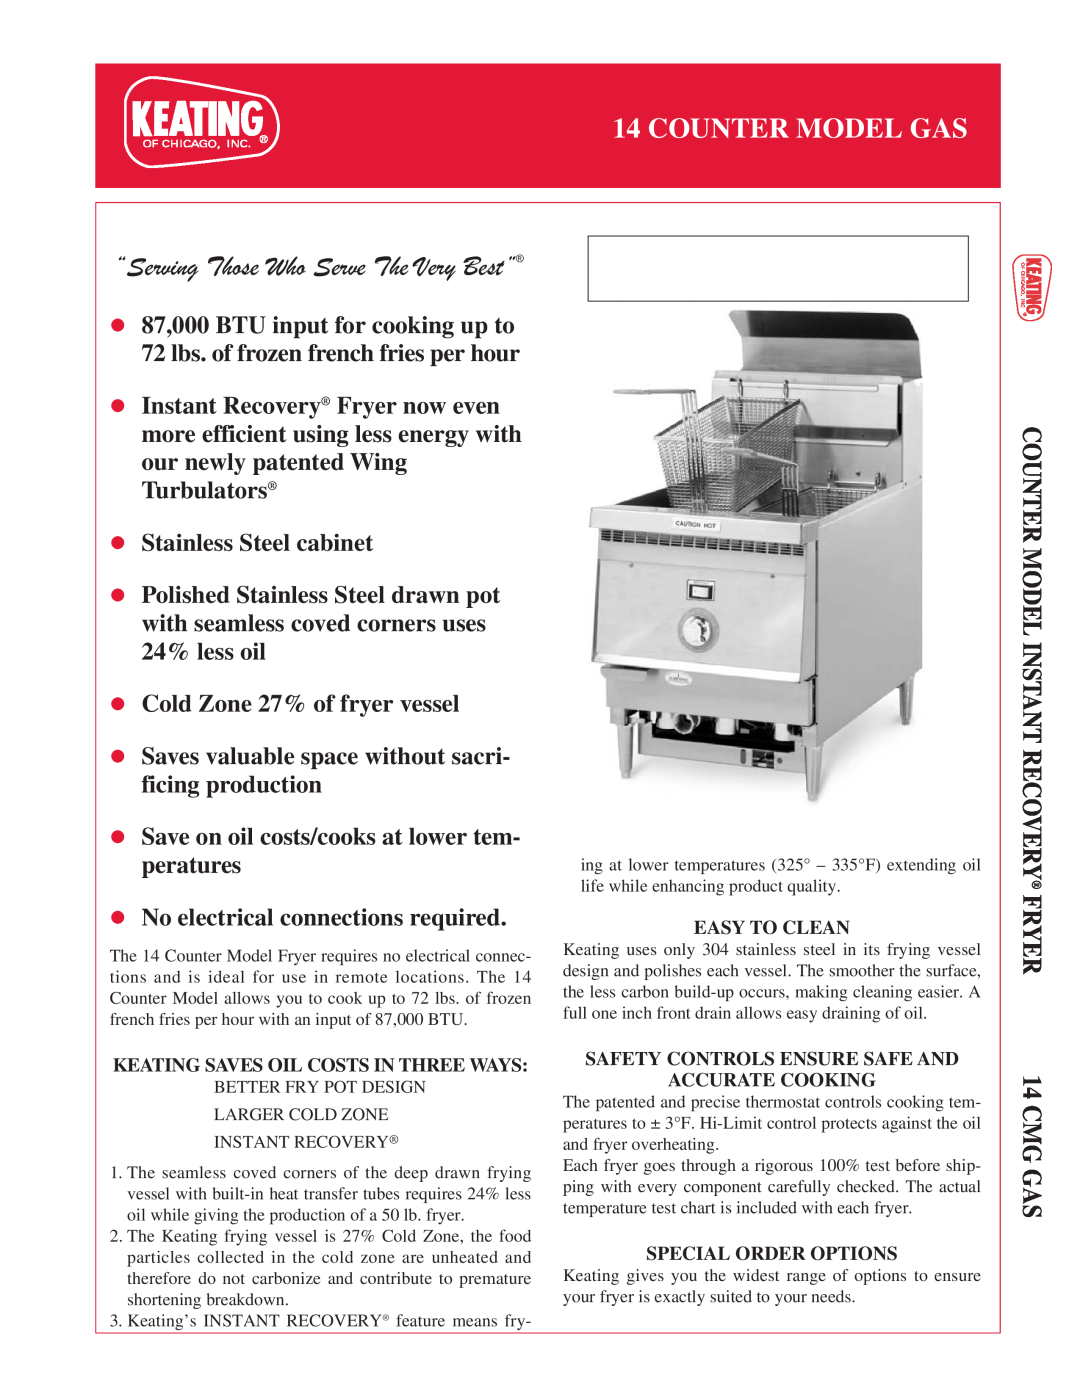 Keating Of Chicago 14 Counter manual Counter Model Gas, COUNTER MODEL INSTANT RECOVERY FRYER 14 CMG GAS, Easy To Clean 